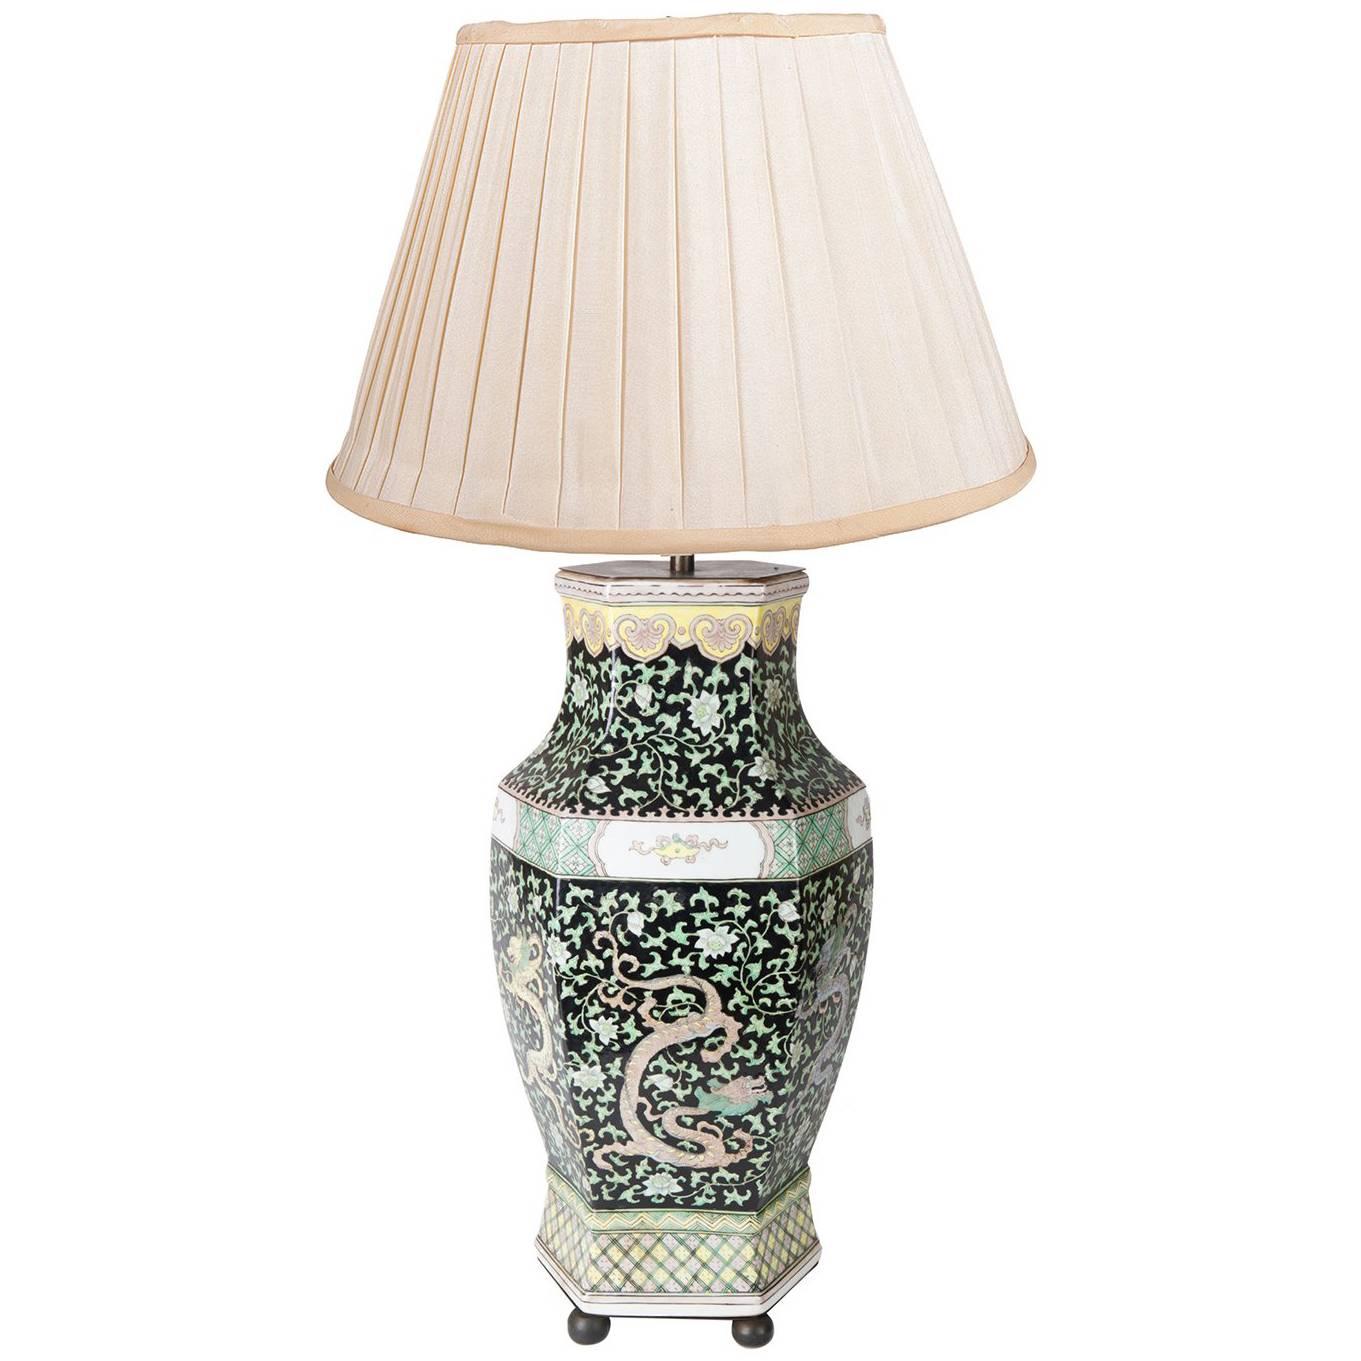 Chinese Famille Noire Vase or Lamp